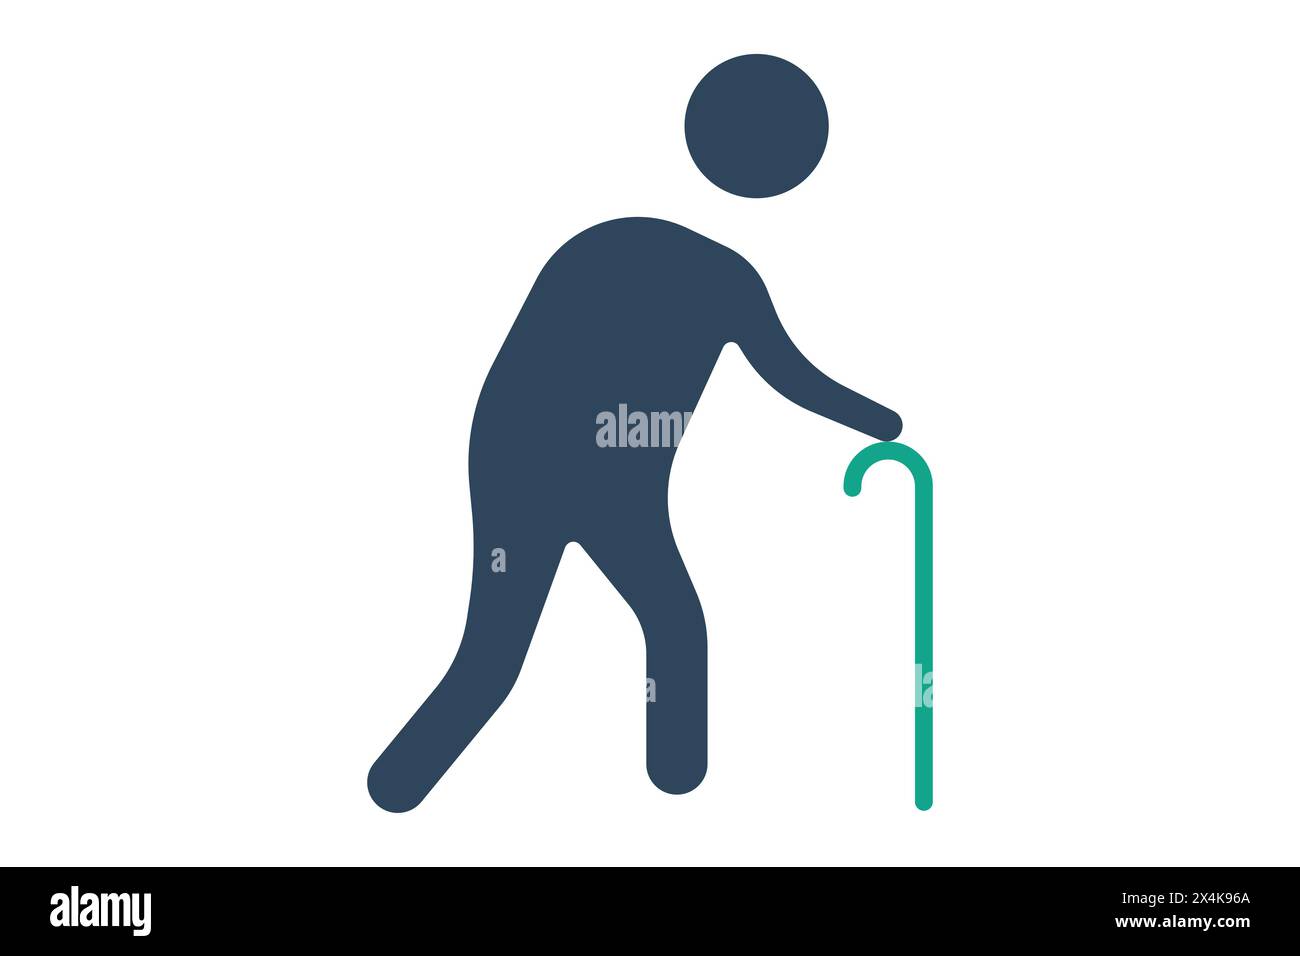 elderly icon. elderly people use walking sticks. solid icon style. old age element illustration Stock Vector